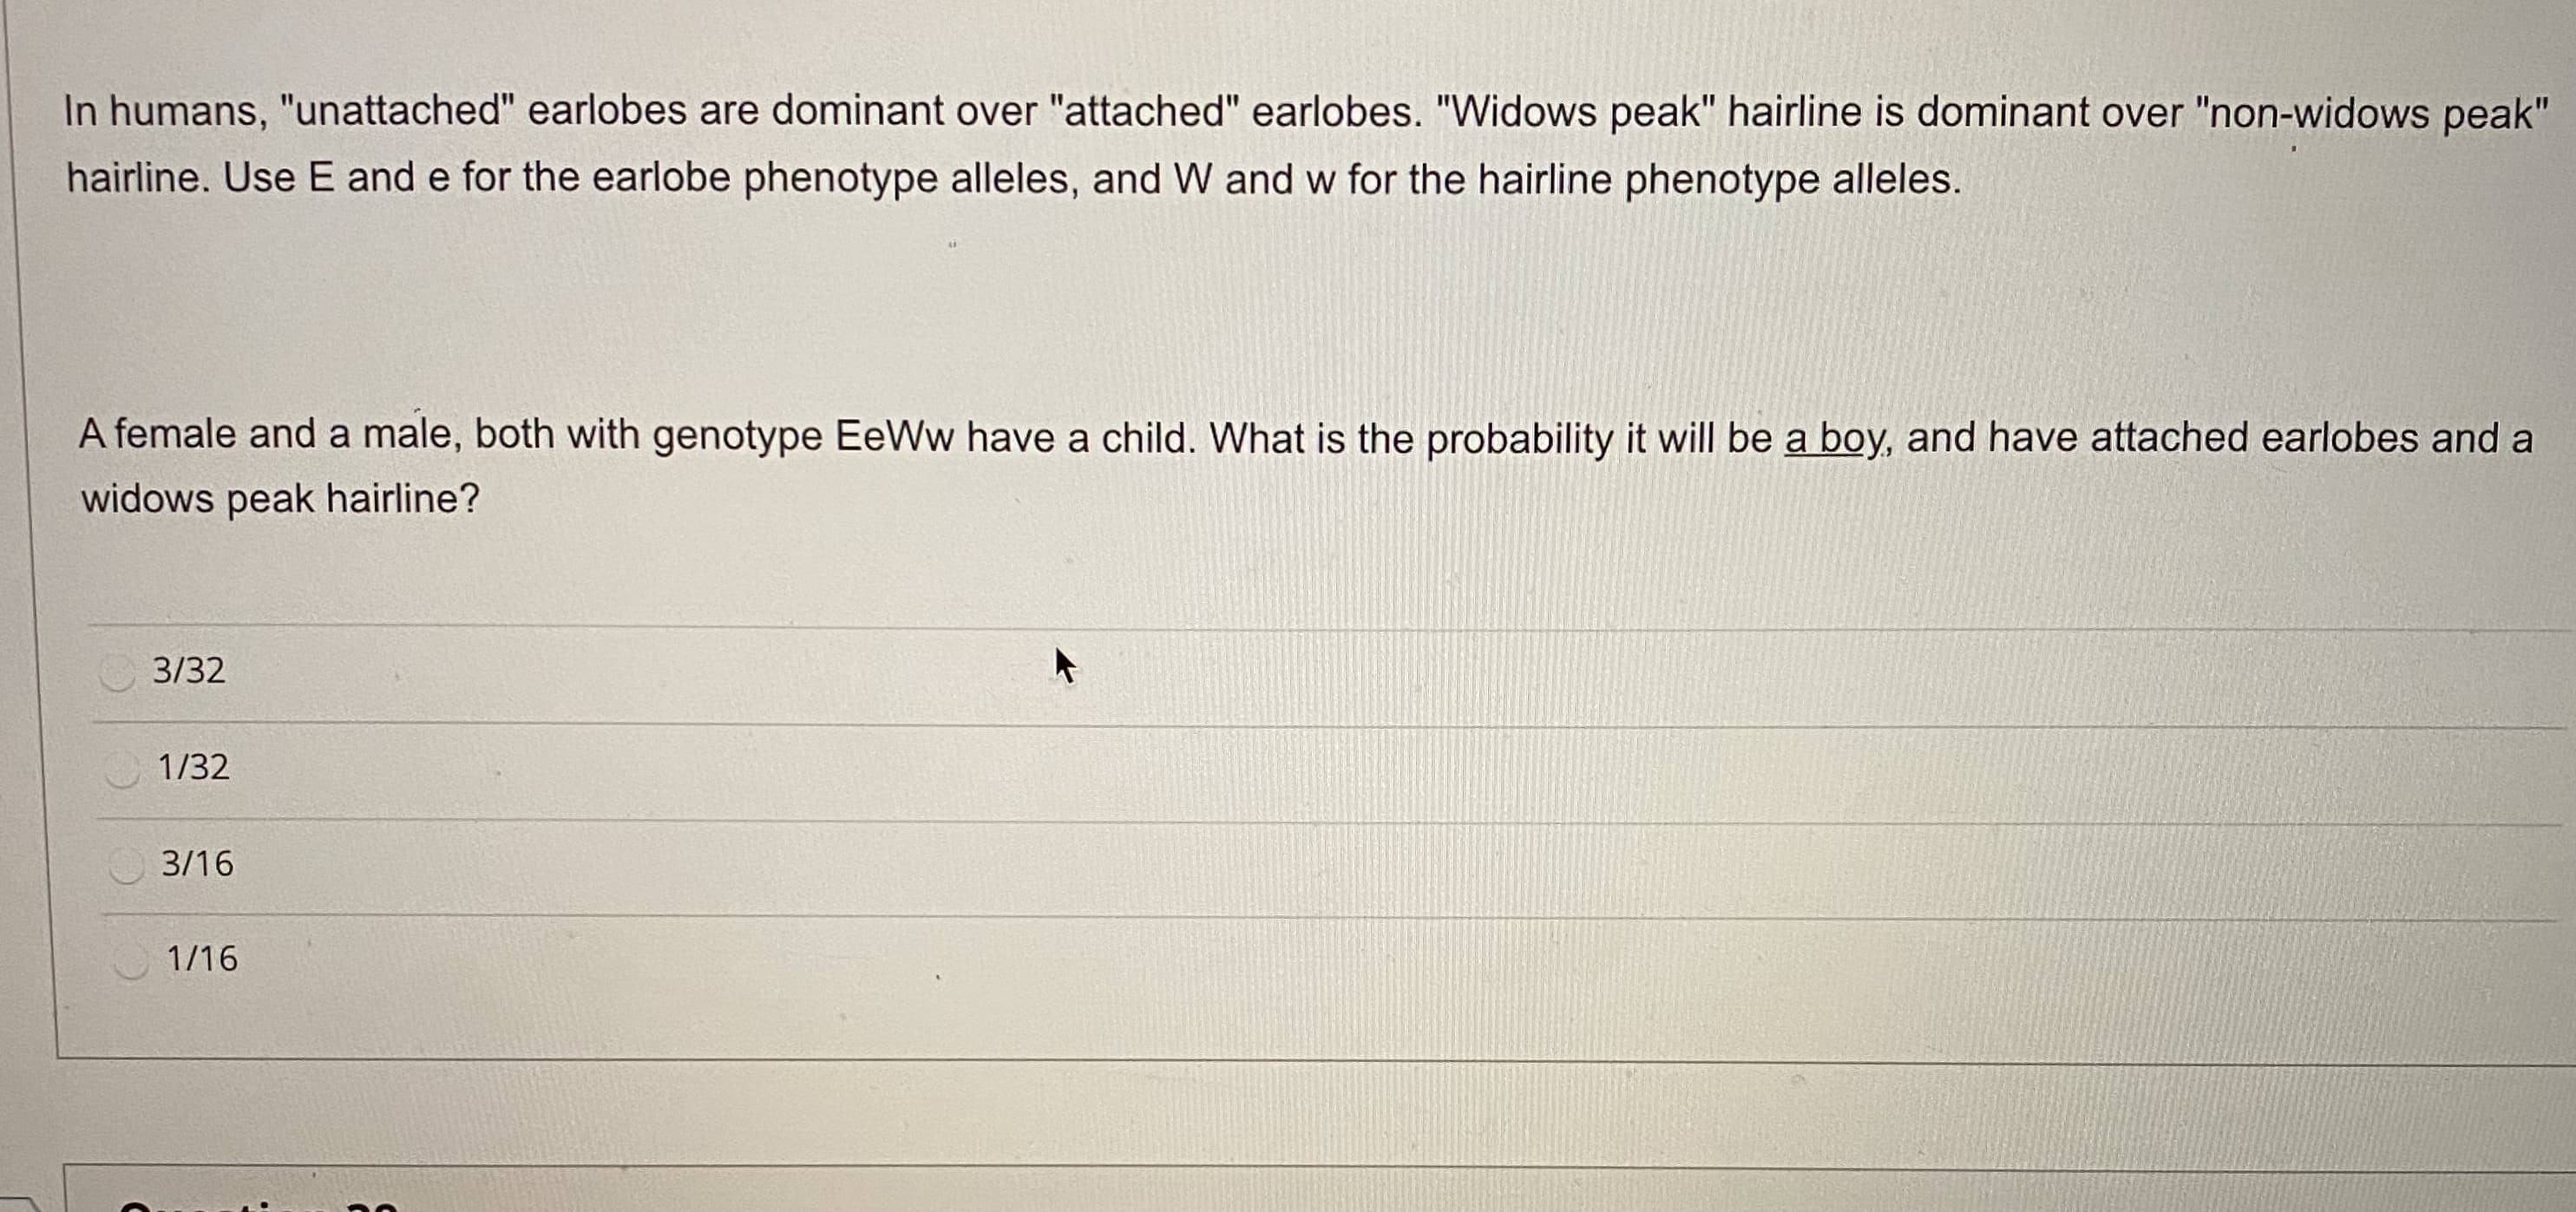 In humans, "unattached" earlobes are dominant over "attached" earlobes. "Widows peak" hairline is dominant over "non-widows peak"
hairline. Use E and e for the earlobe phenotype alleles, and W and w for the hairline phenotype alleles.
A female and a male, both with genotype EeWw have a child. What is the probability it will be a boy, and have attached earlobes and a
widows peak hairline?
